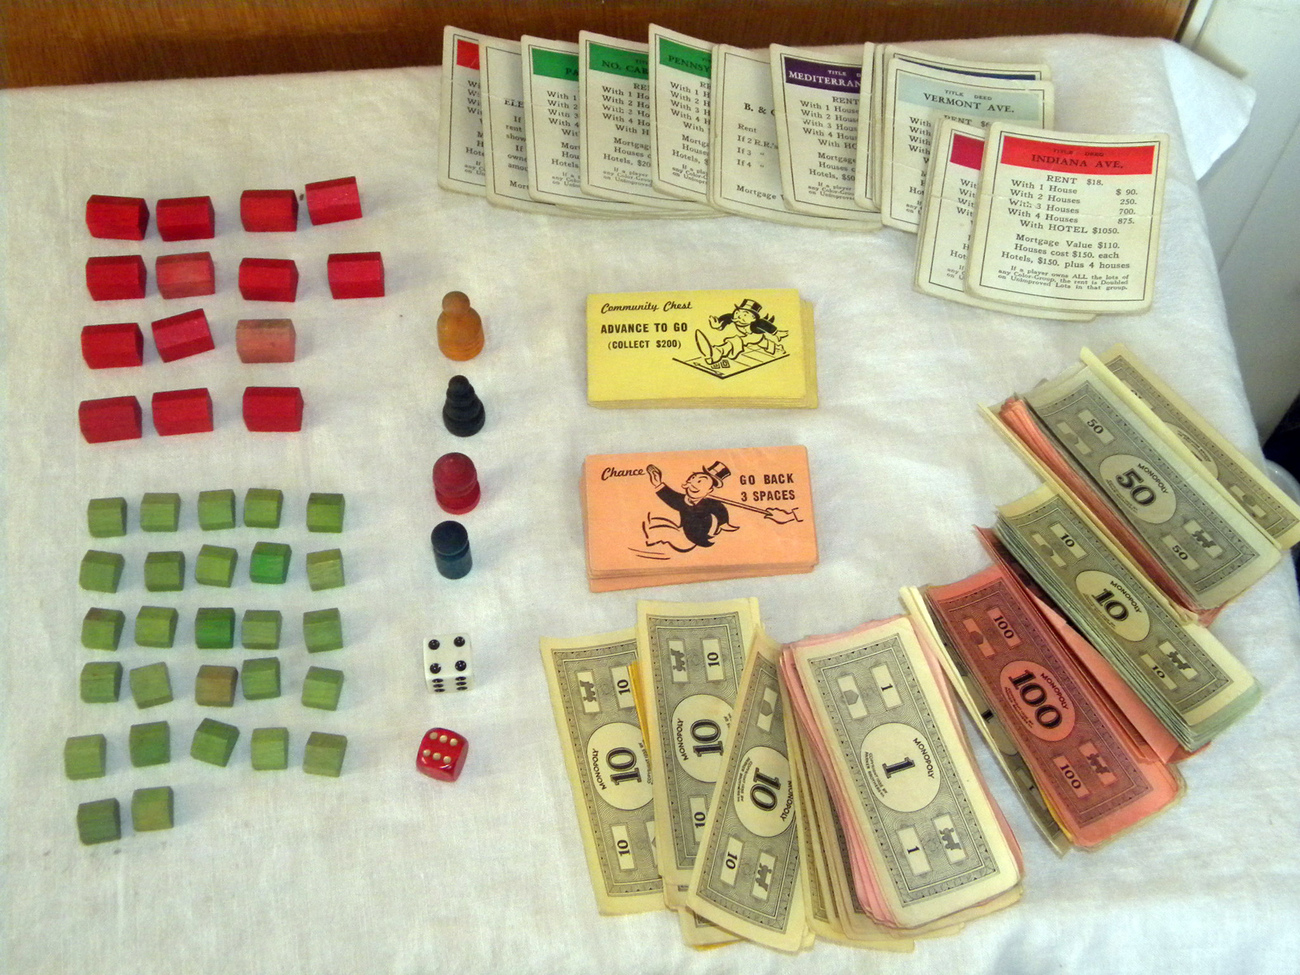 Monopoly Original Classic REPLACEMENT GAME PARTS Money Houses Hotels Deed Chance 